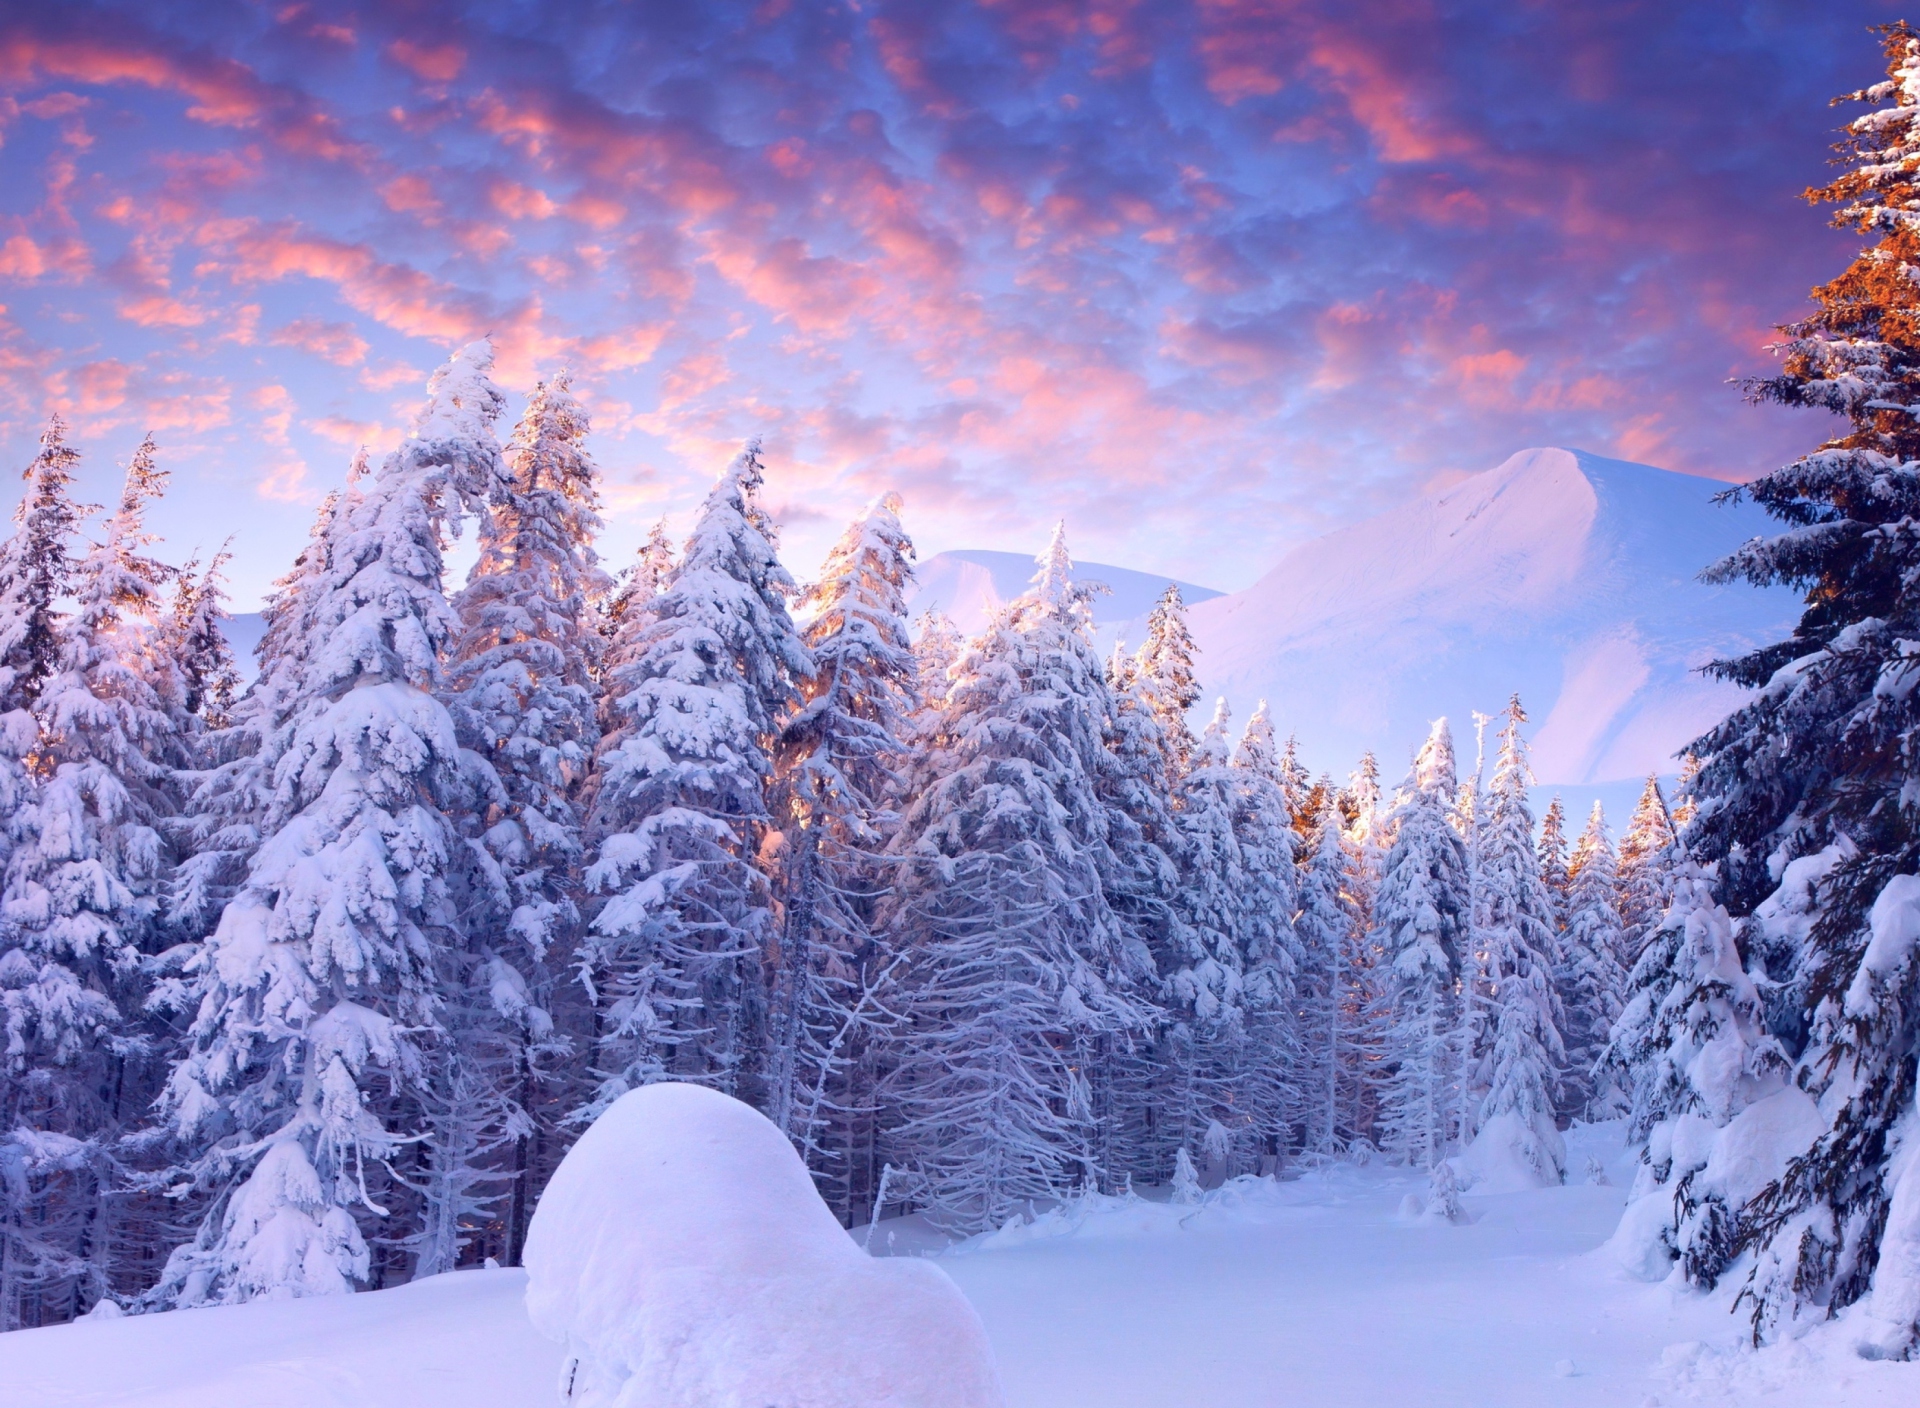 Snowy Christmas Trees In Forest wallpaper 1920x1408